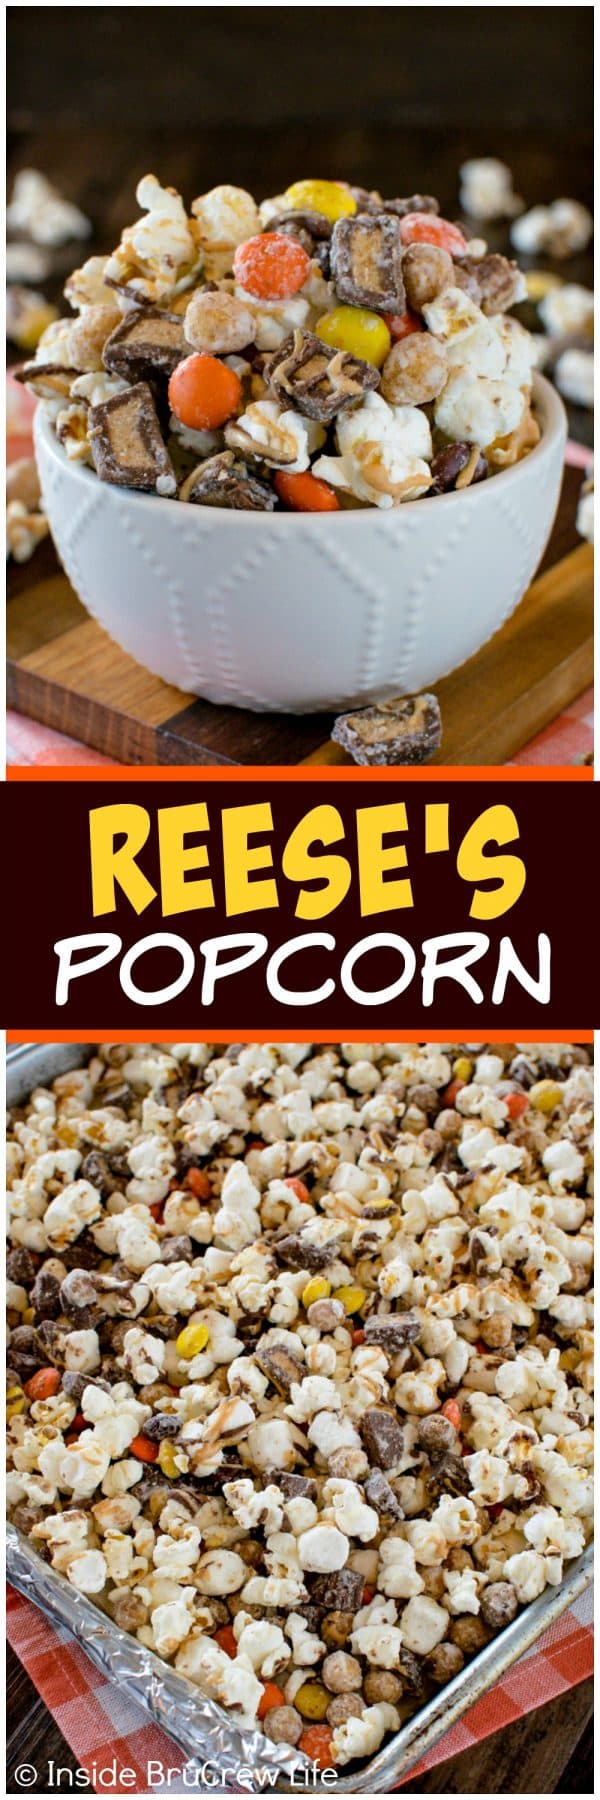 Reese's Popcorn - three times the peanut butter goodness in this easy no bake snack mix makes it disappear. Great recipe for munching on or giving as a gift!